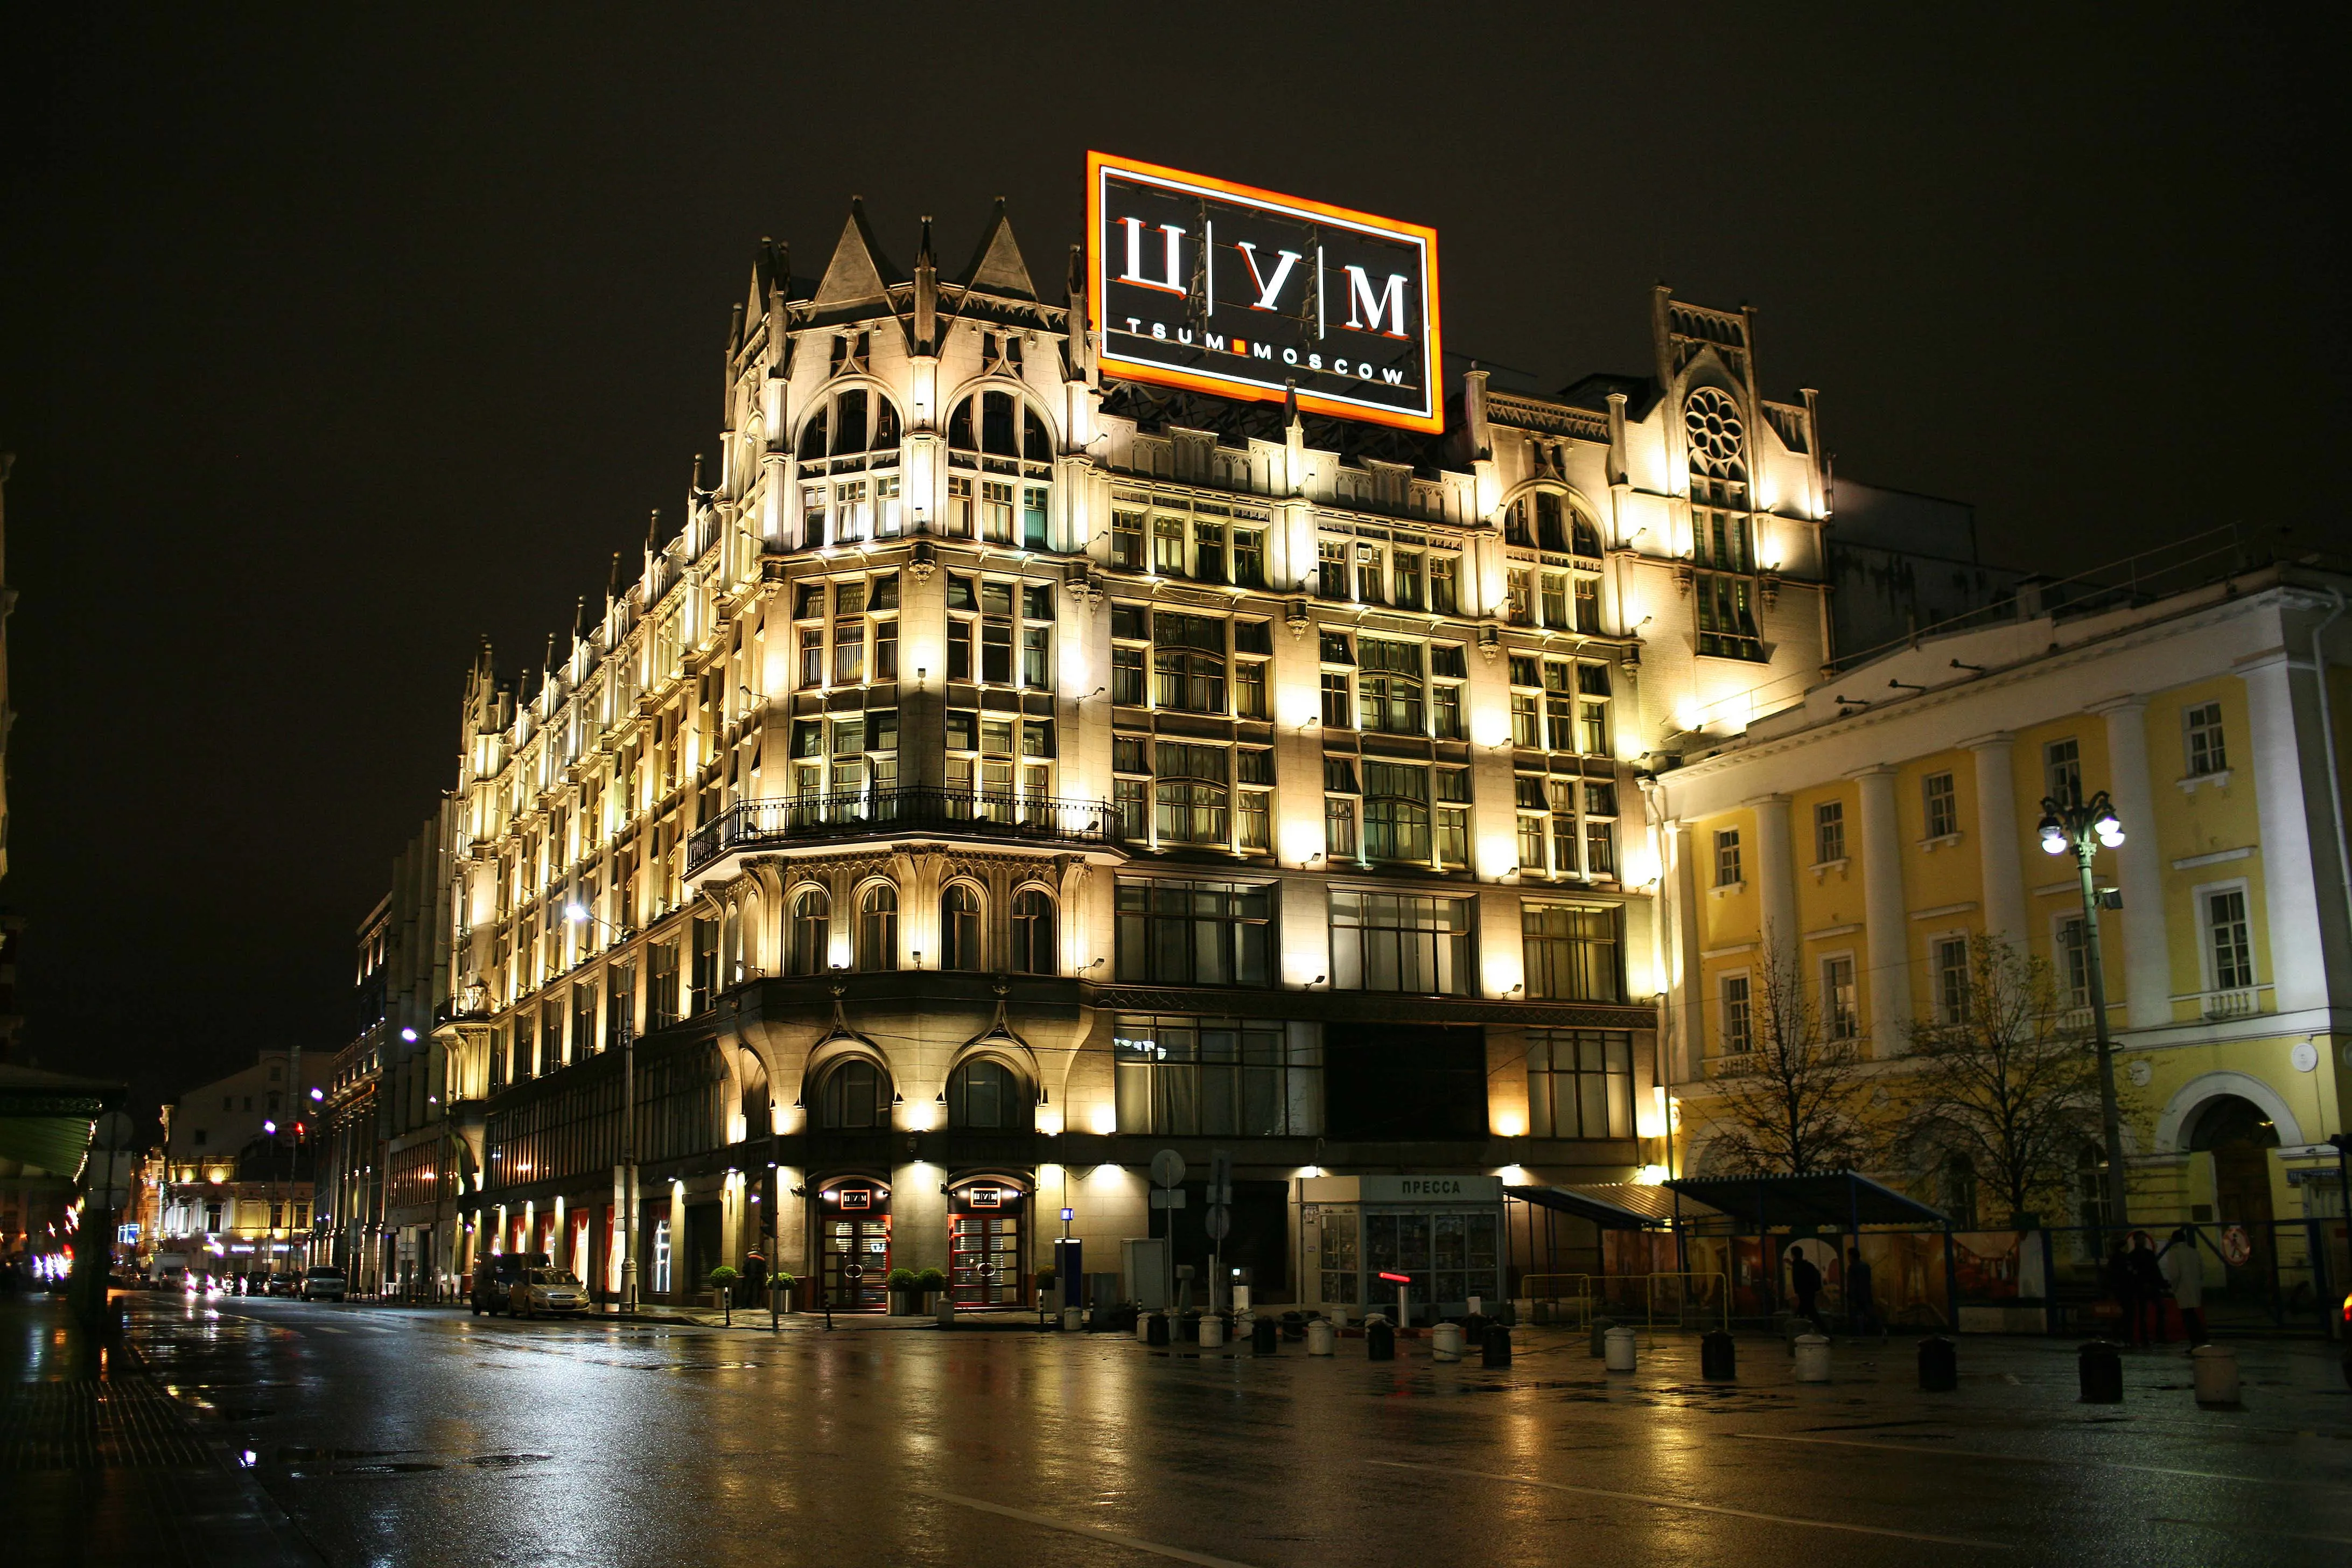 TsUM in Russia, europe | Fragrance,Handbags,Shoes,Accessories,Clothes,Gifts,Watches,Travel Bags - Country Helper